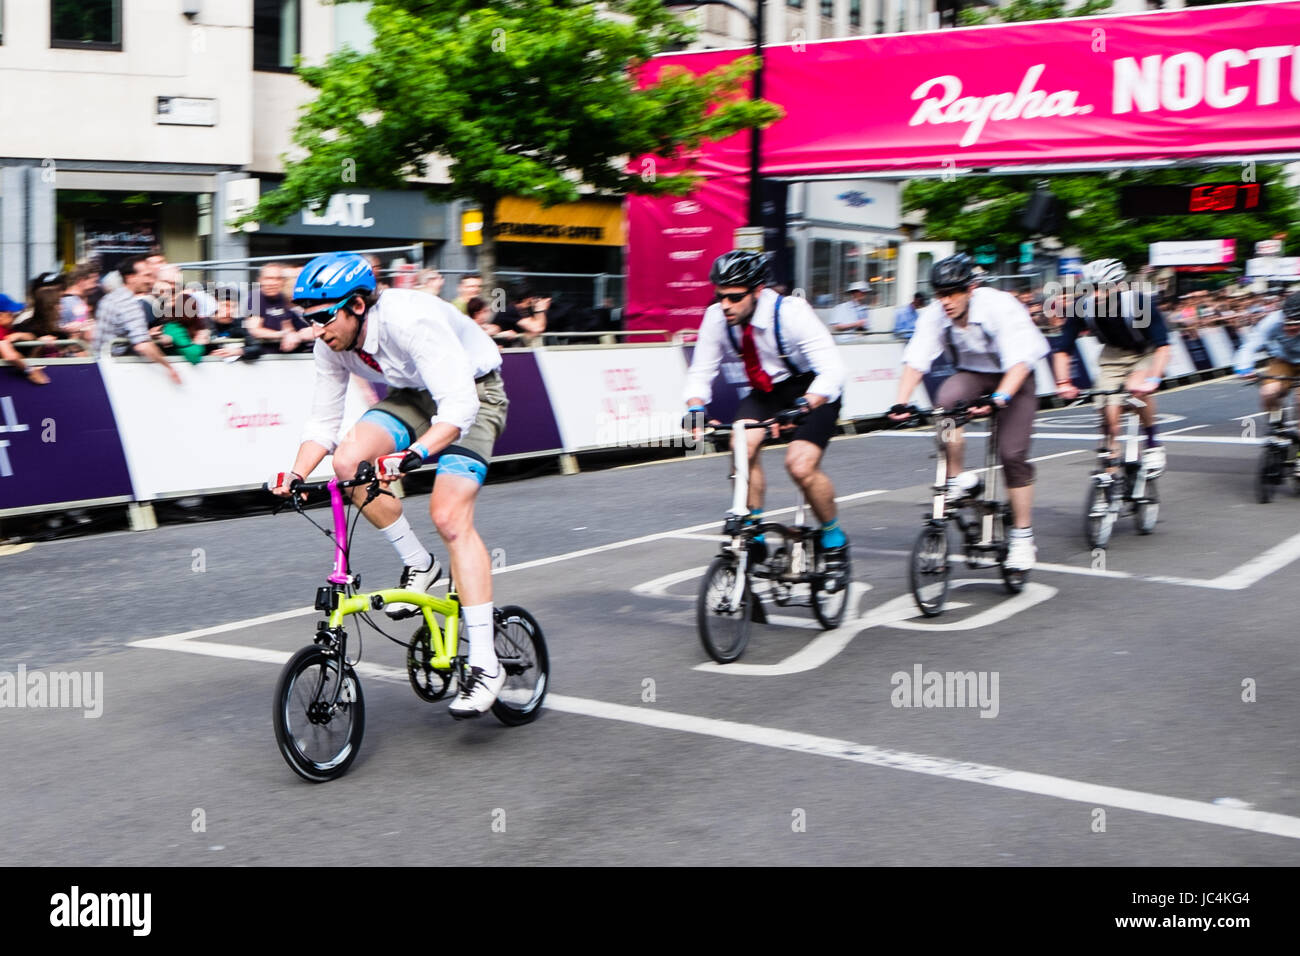 Racing on Brompton bikes at the 2017 London Rahpa Nocturne Criterium Race Stock Photo